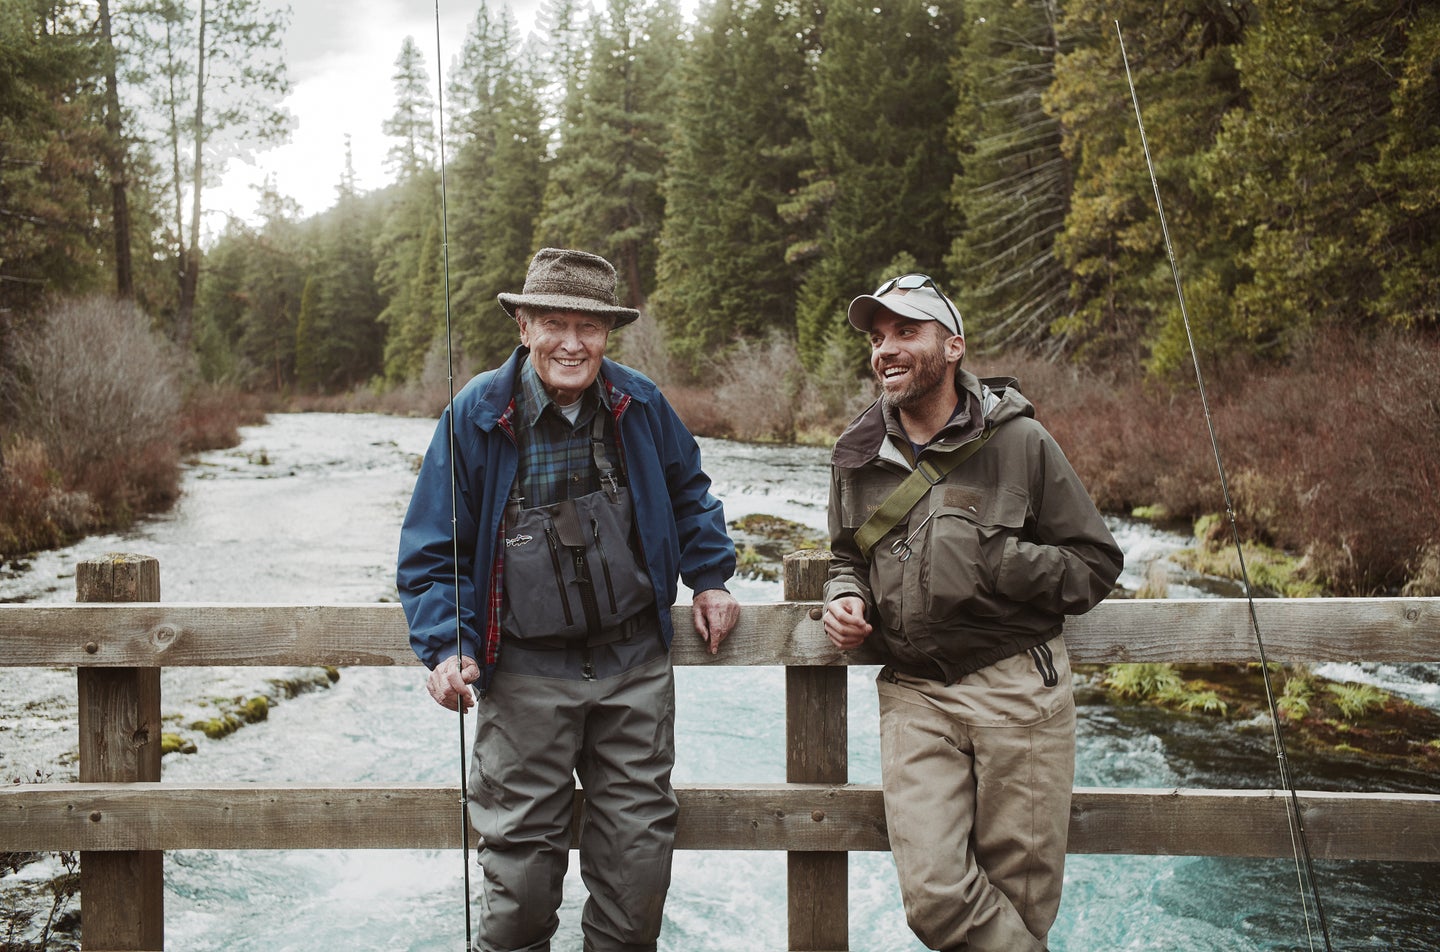 Volker Oakey (left) and Eben Pindyck take a break from fly fishing on Oregon's Metolius River.